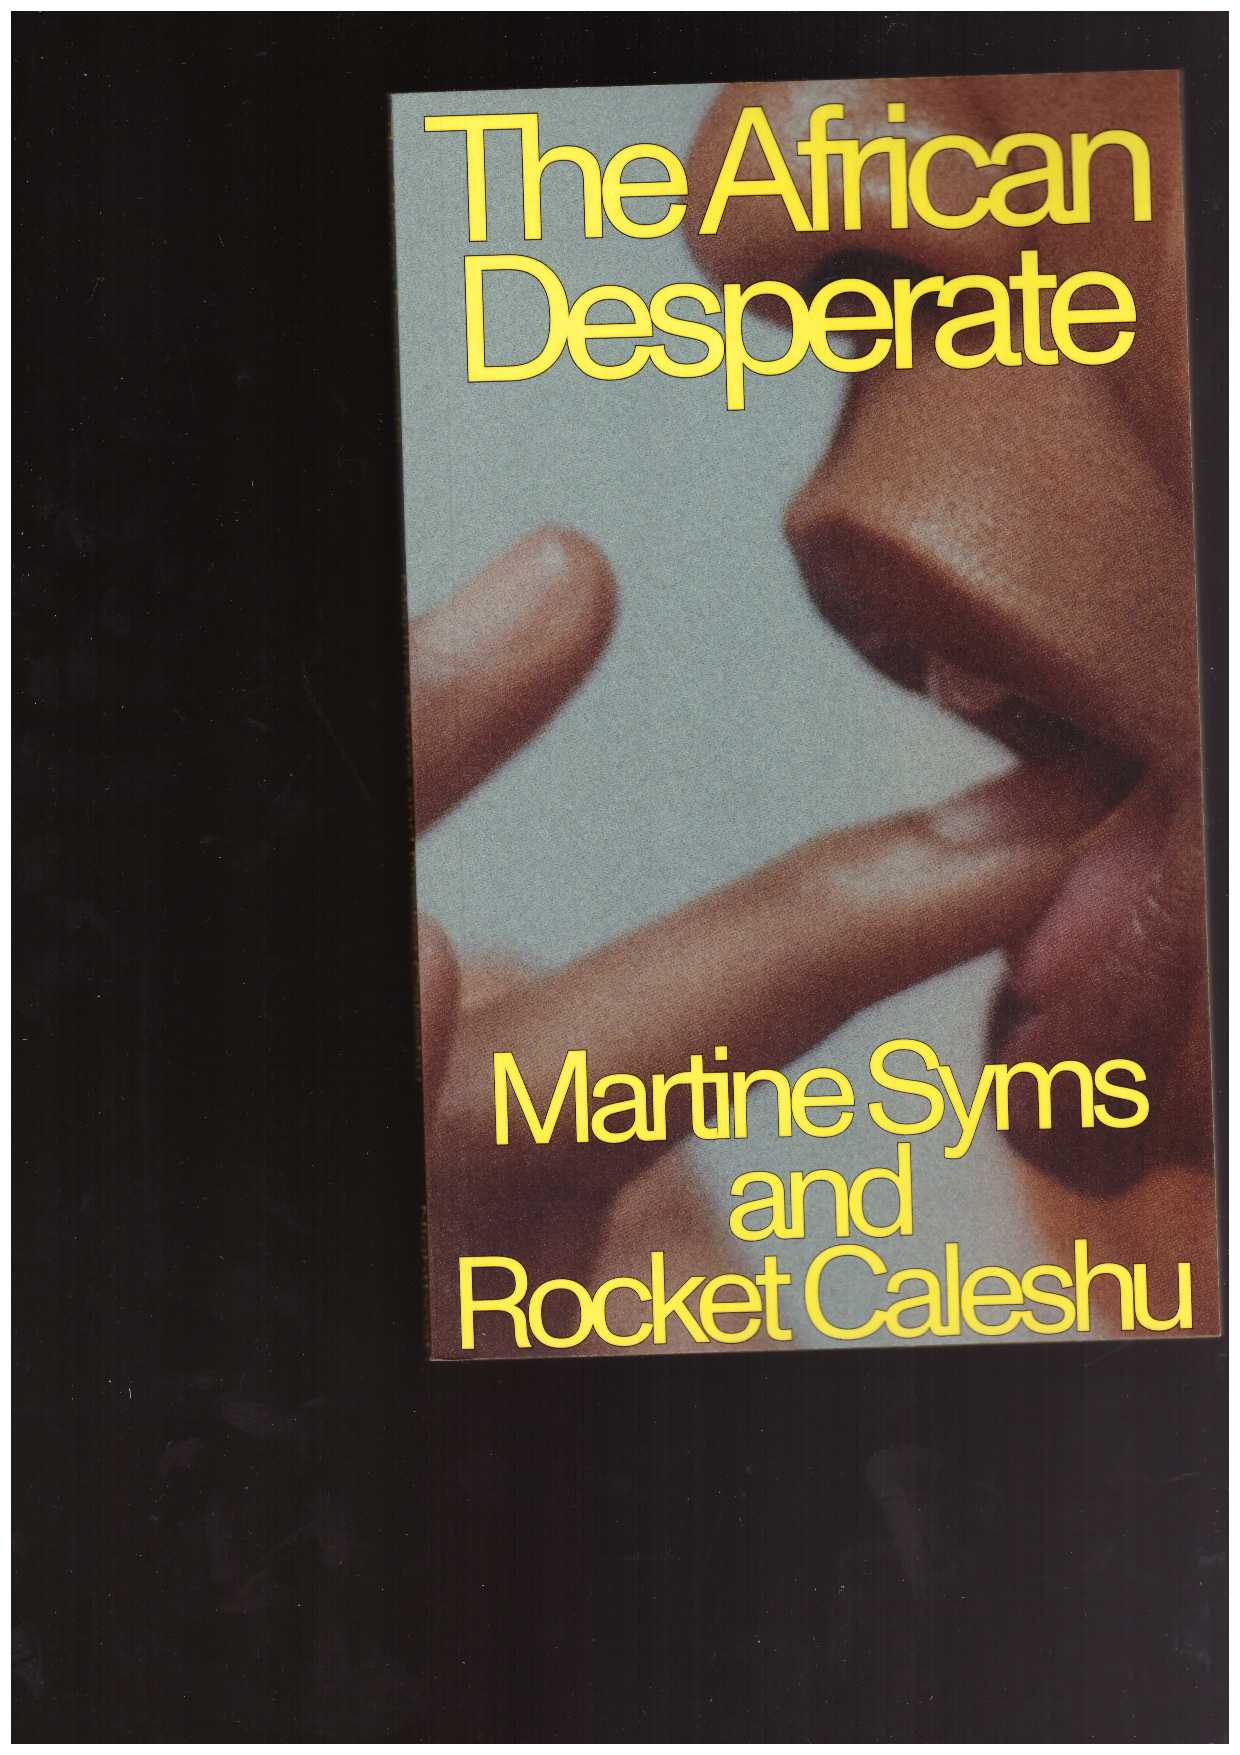 SYMS, Martine; CALESHU, Rocket - The African Desperate